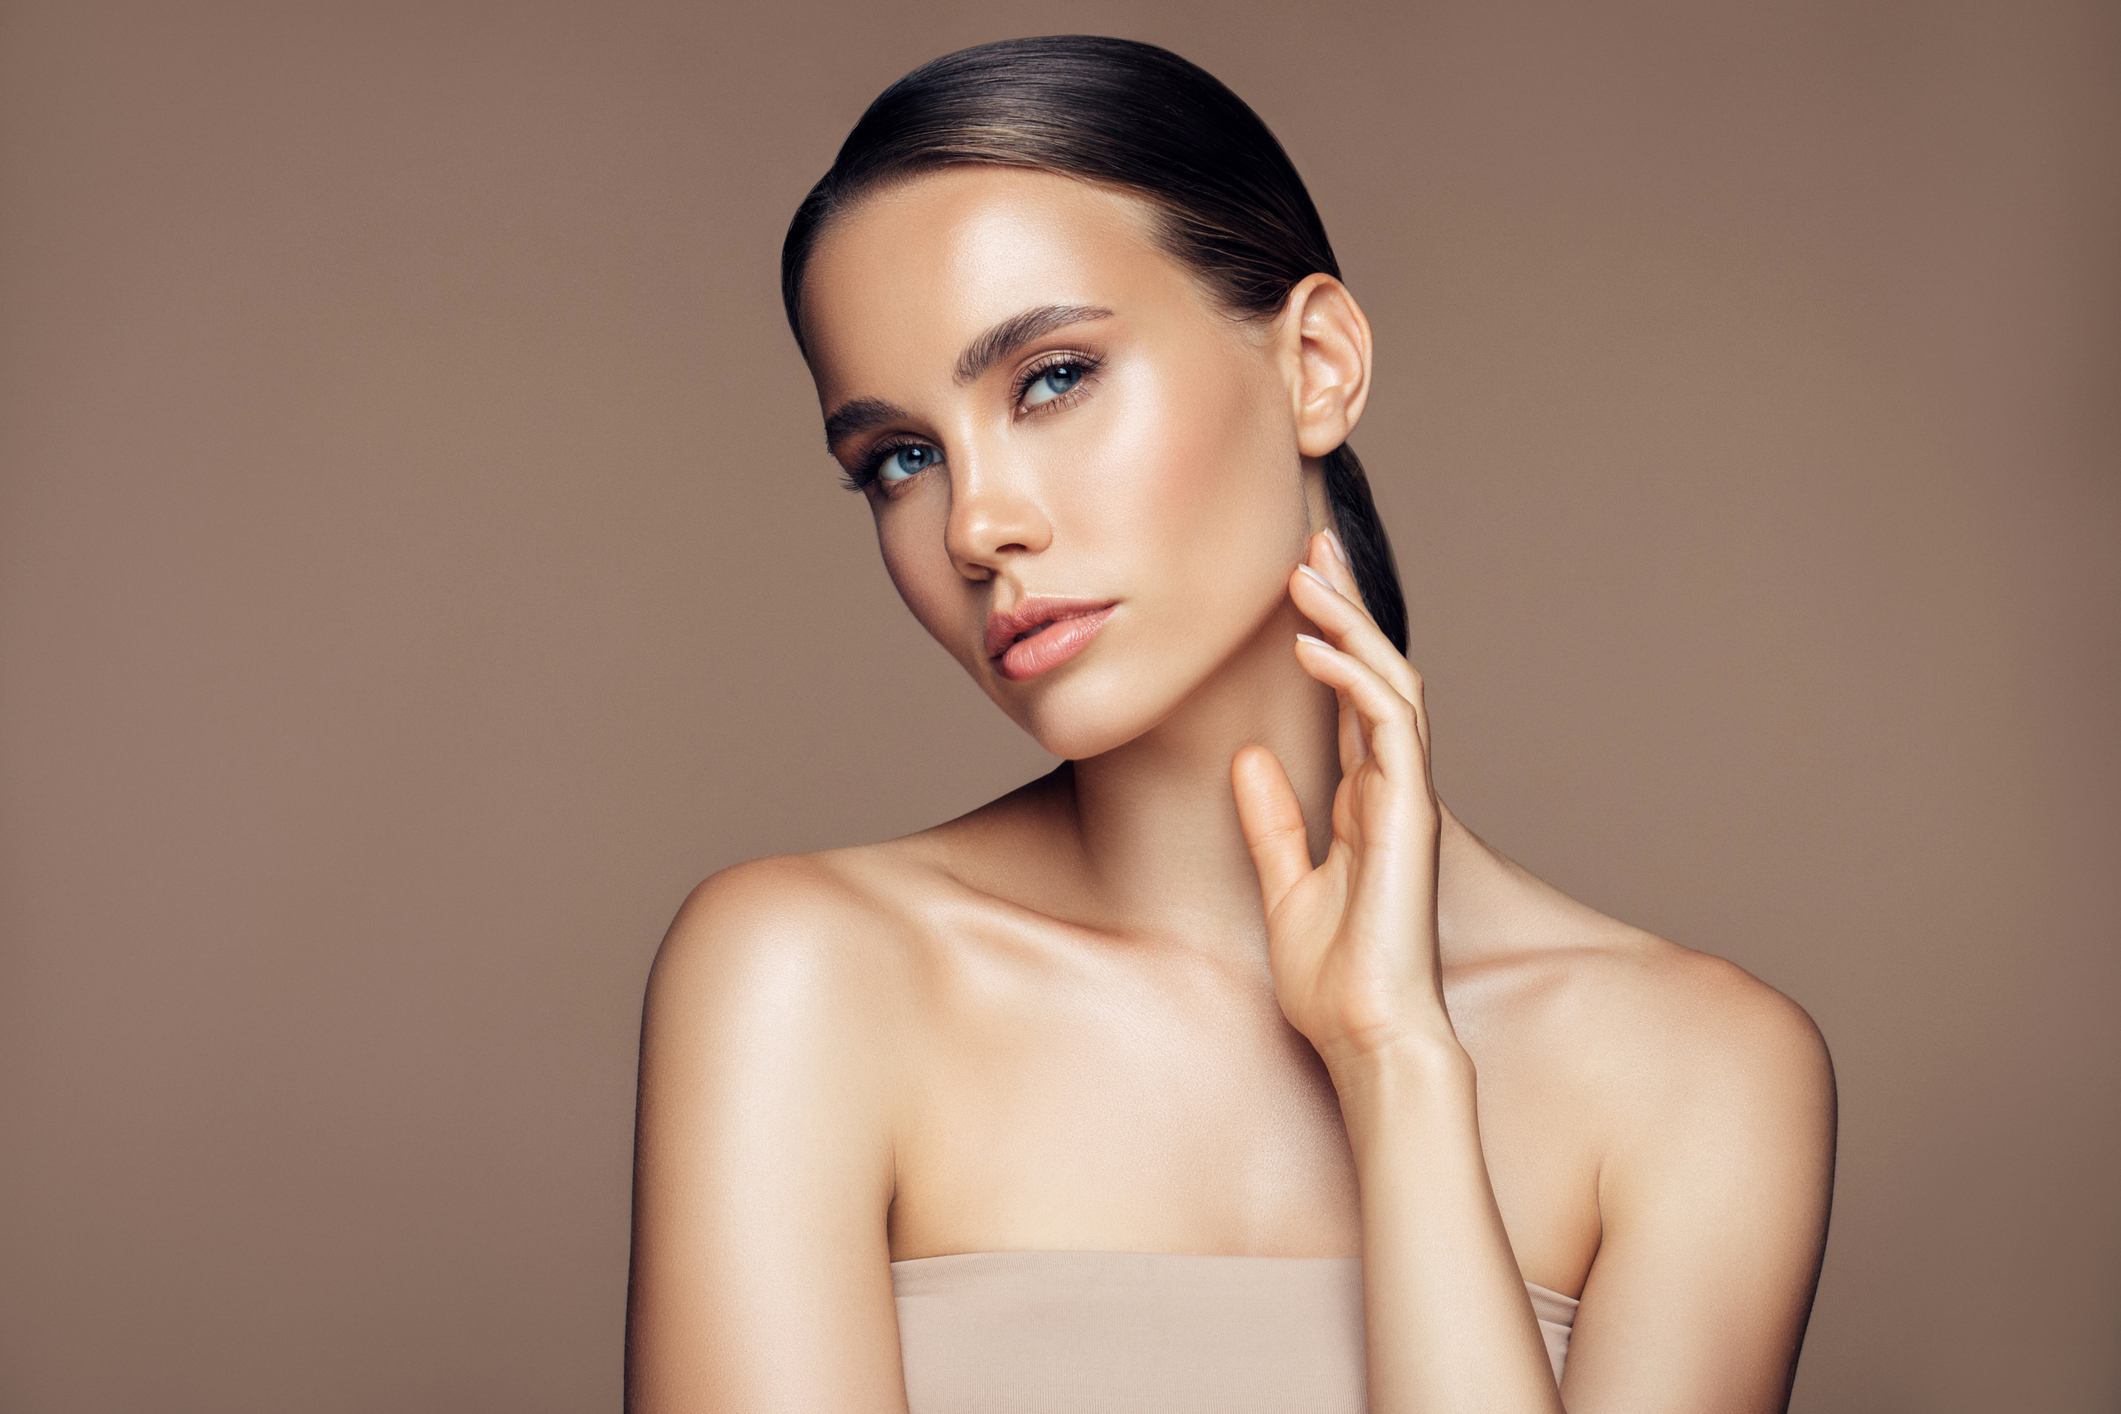 Bloom Facial Plastic Surgery Blog | How Long Does BOTOX Last? Exploring the Lifespan of the Treatment